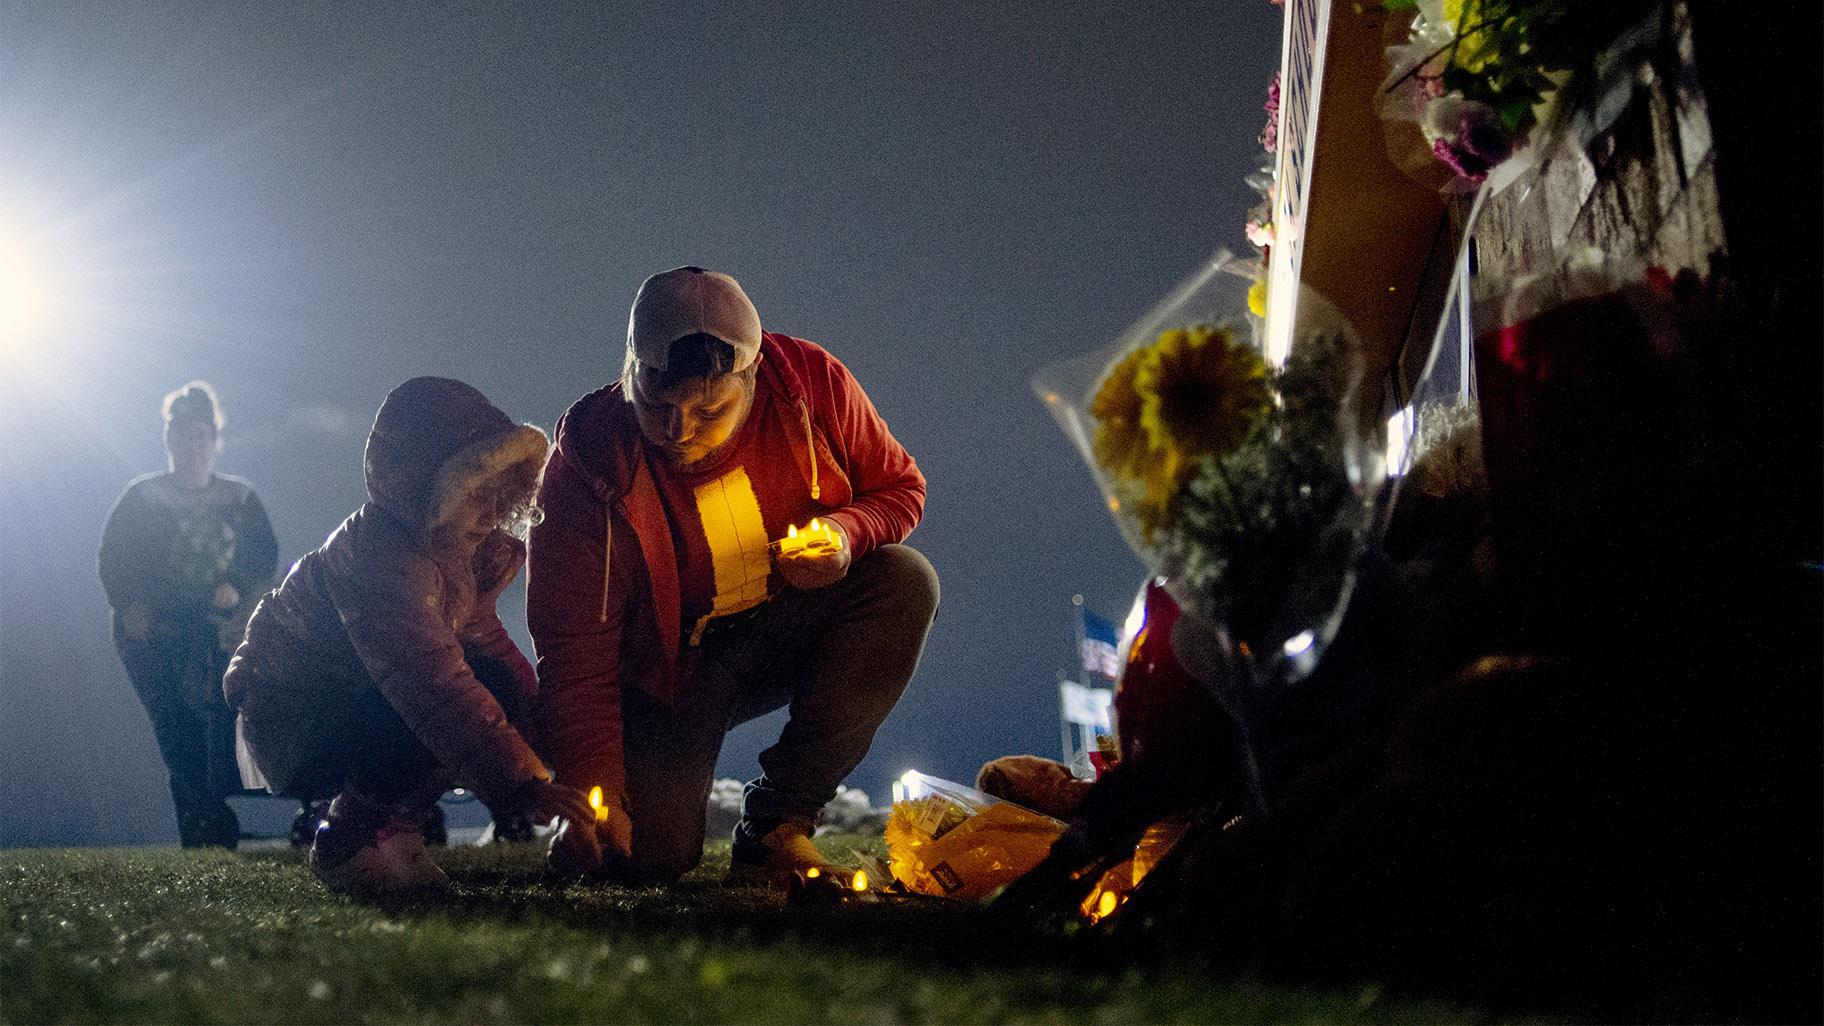 Waterford resident Andrew Baldwin, cousin of Madisyn Baldwin, places candles at the base of a a memorial with his 5-year-old daughter Ariyah Baldwin on Wednesday, Dec. 1, 2021 outside of Oxford High School in Oxford, Mich.  (Jake May / The Flint Journal via AP)